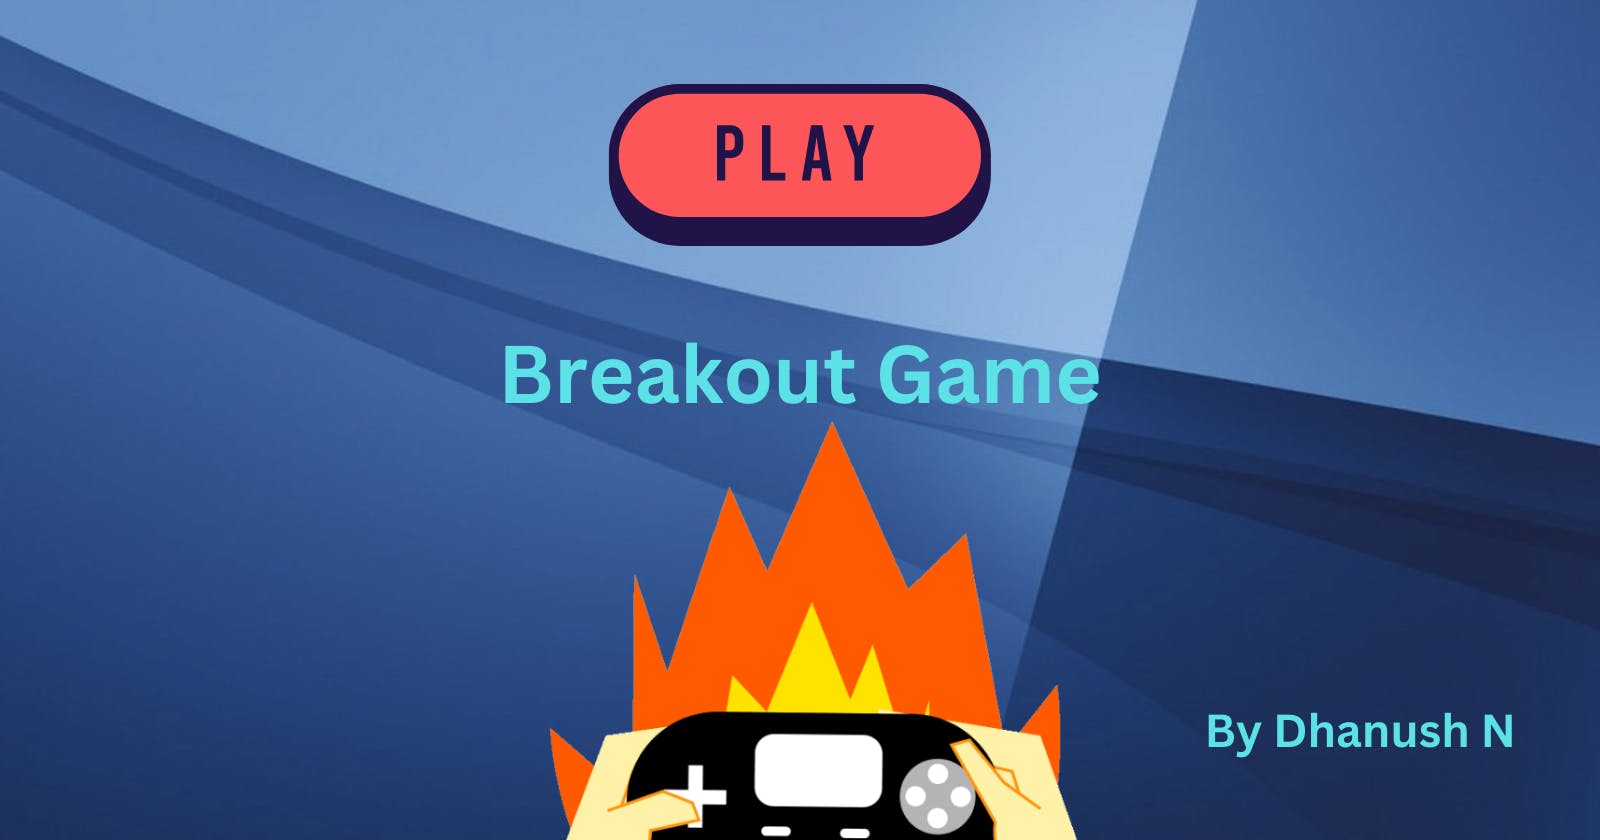 Build a breakout game